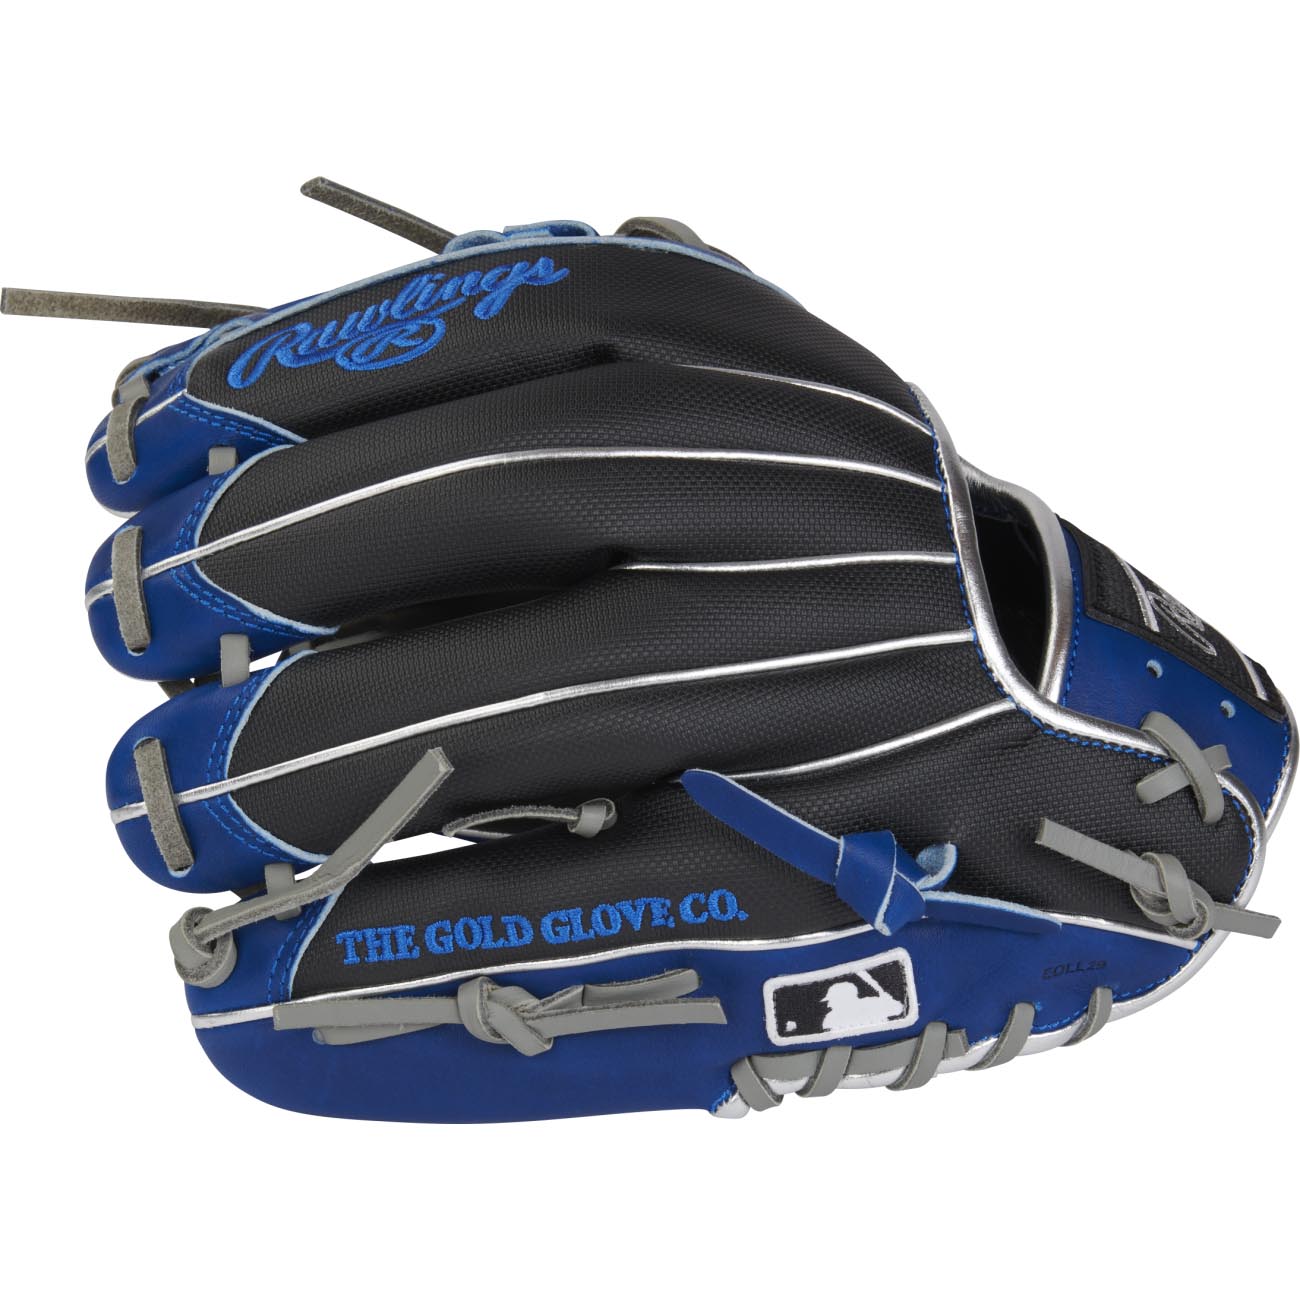 Rawlings Heart of the Hide Color Sync 7.0 RPRO204-2BRSS 11.5"-RHT